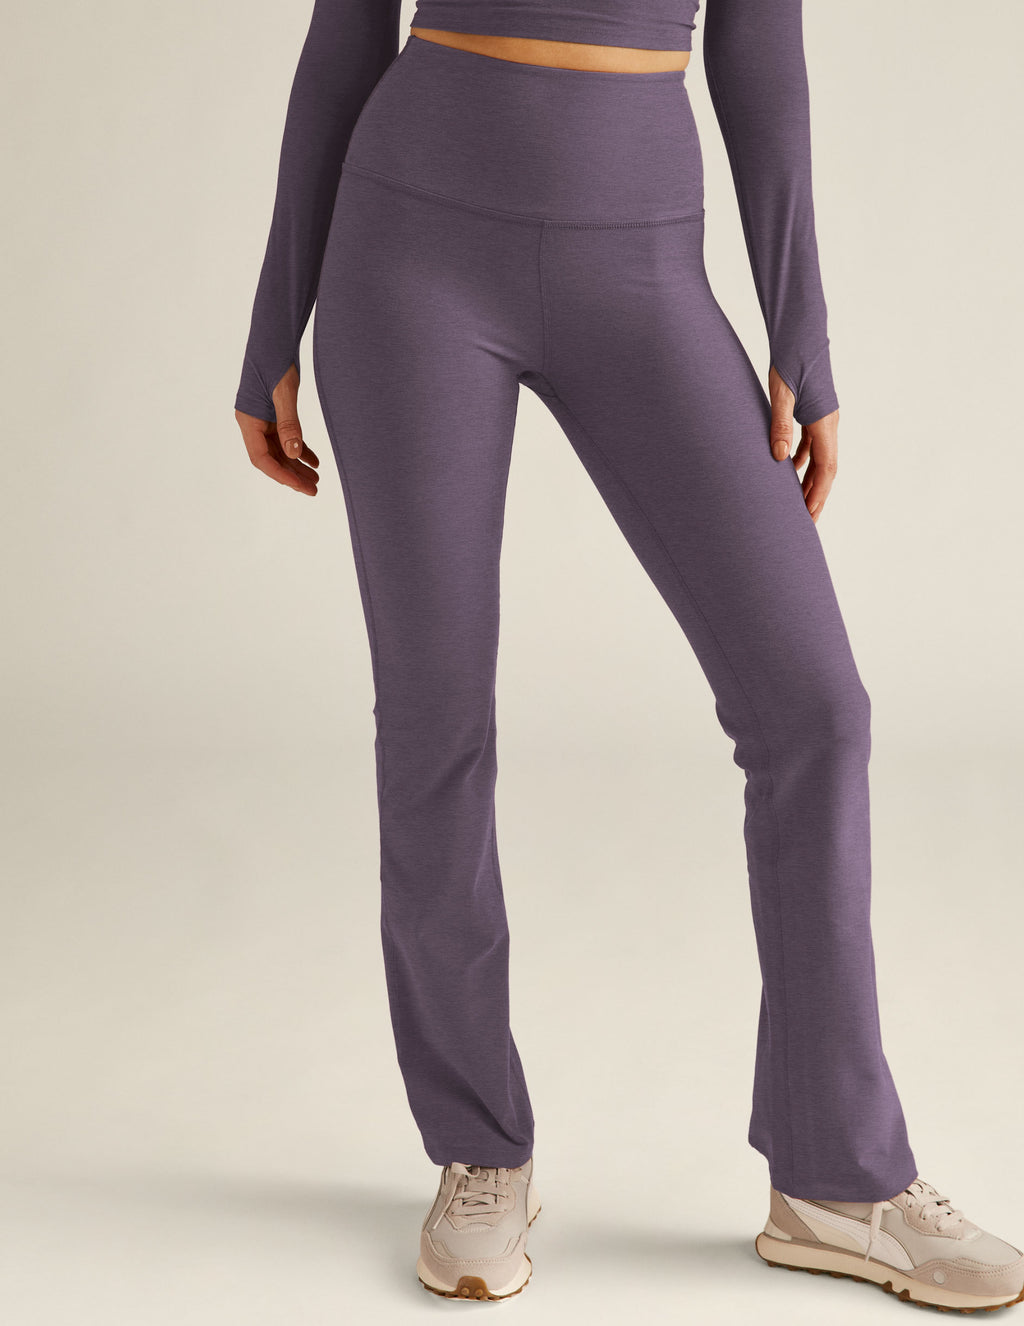 High Waisted Candy Colored Ice Silk Yoga Purple Leggings For Women Sexy  Ankle Length, Glossy, Slimming Pants In Big Sizes 5XL From Hongpingguog,  $10.06